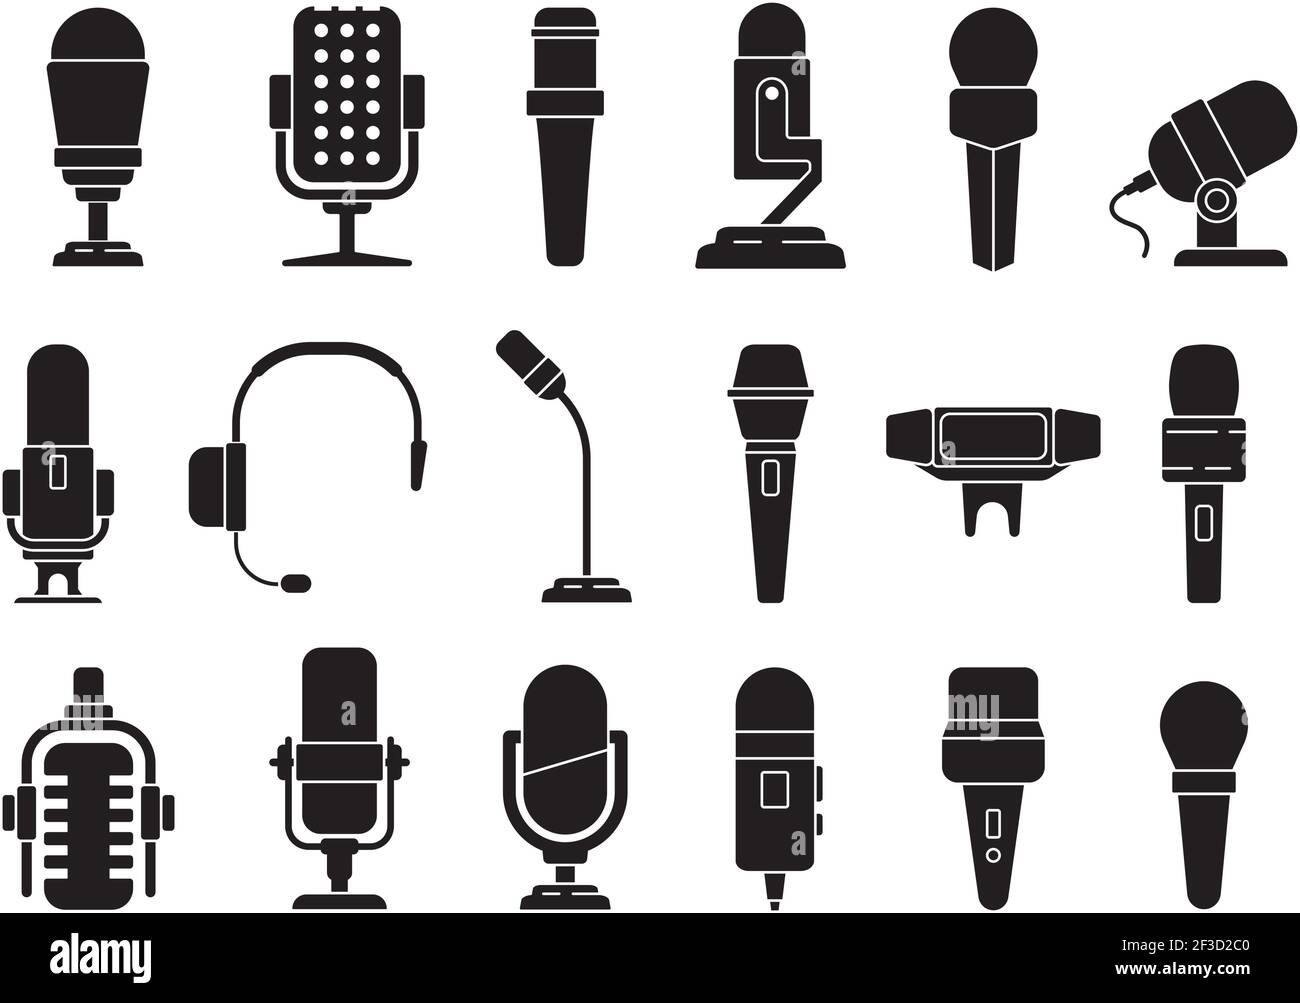 Microphone icon. Sound record studio music speech recorder items vector picture of microphones Stock Vector